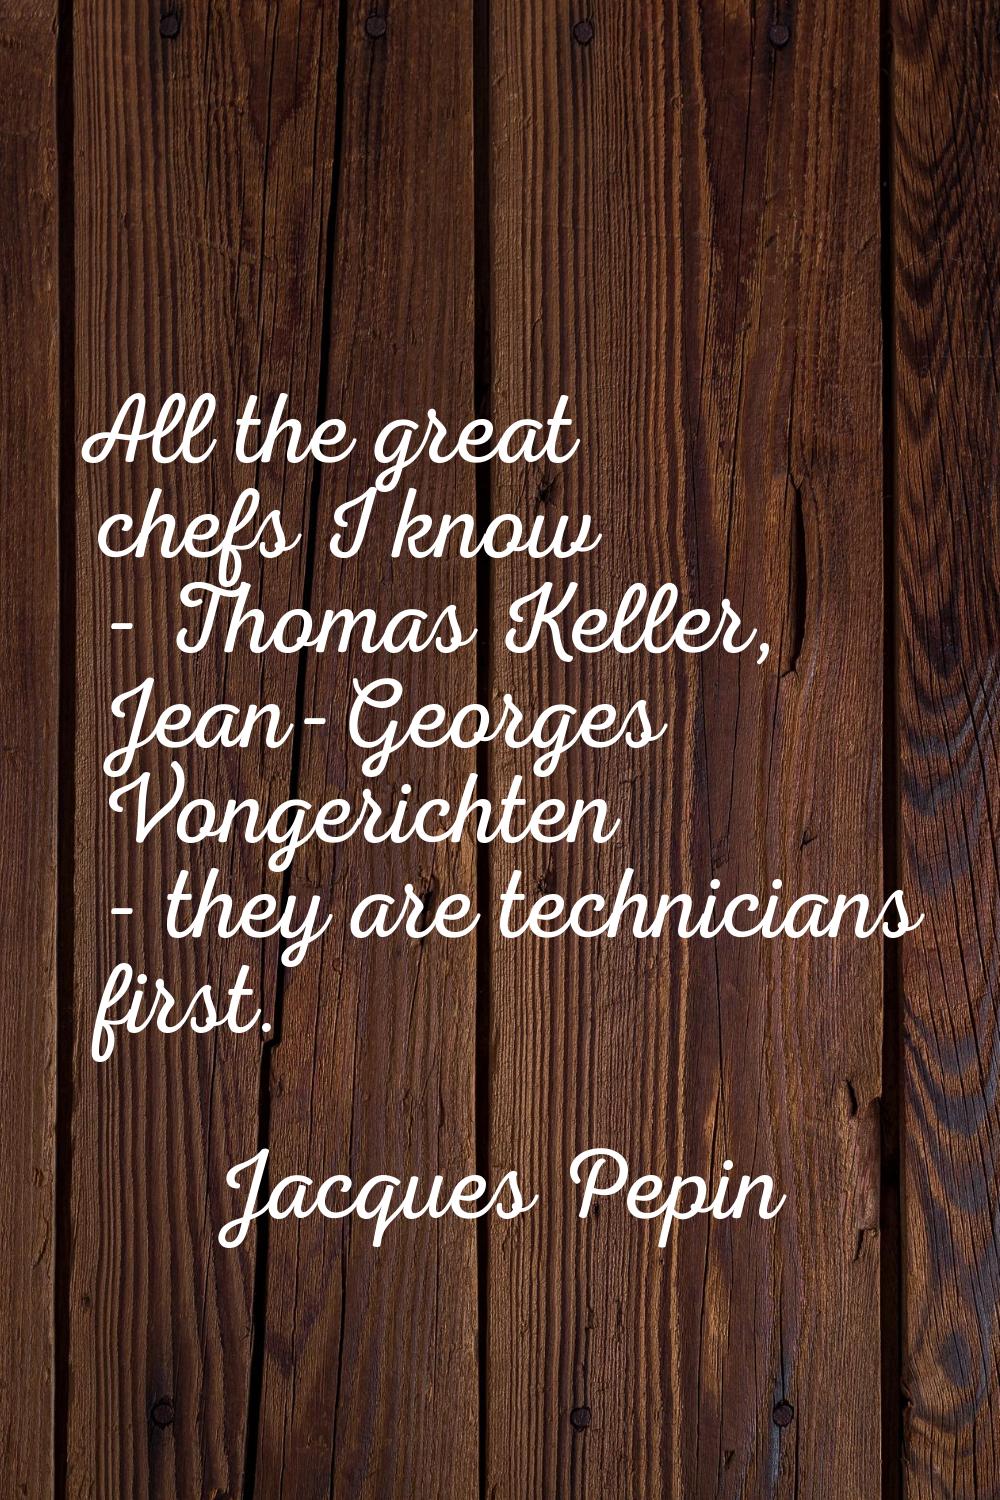 All the great chefs I know - Thomas Keller, Jean-Georges Vongerichten - they are technicians first.